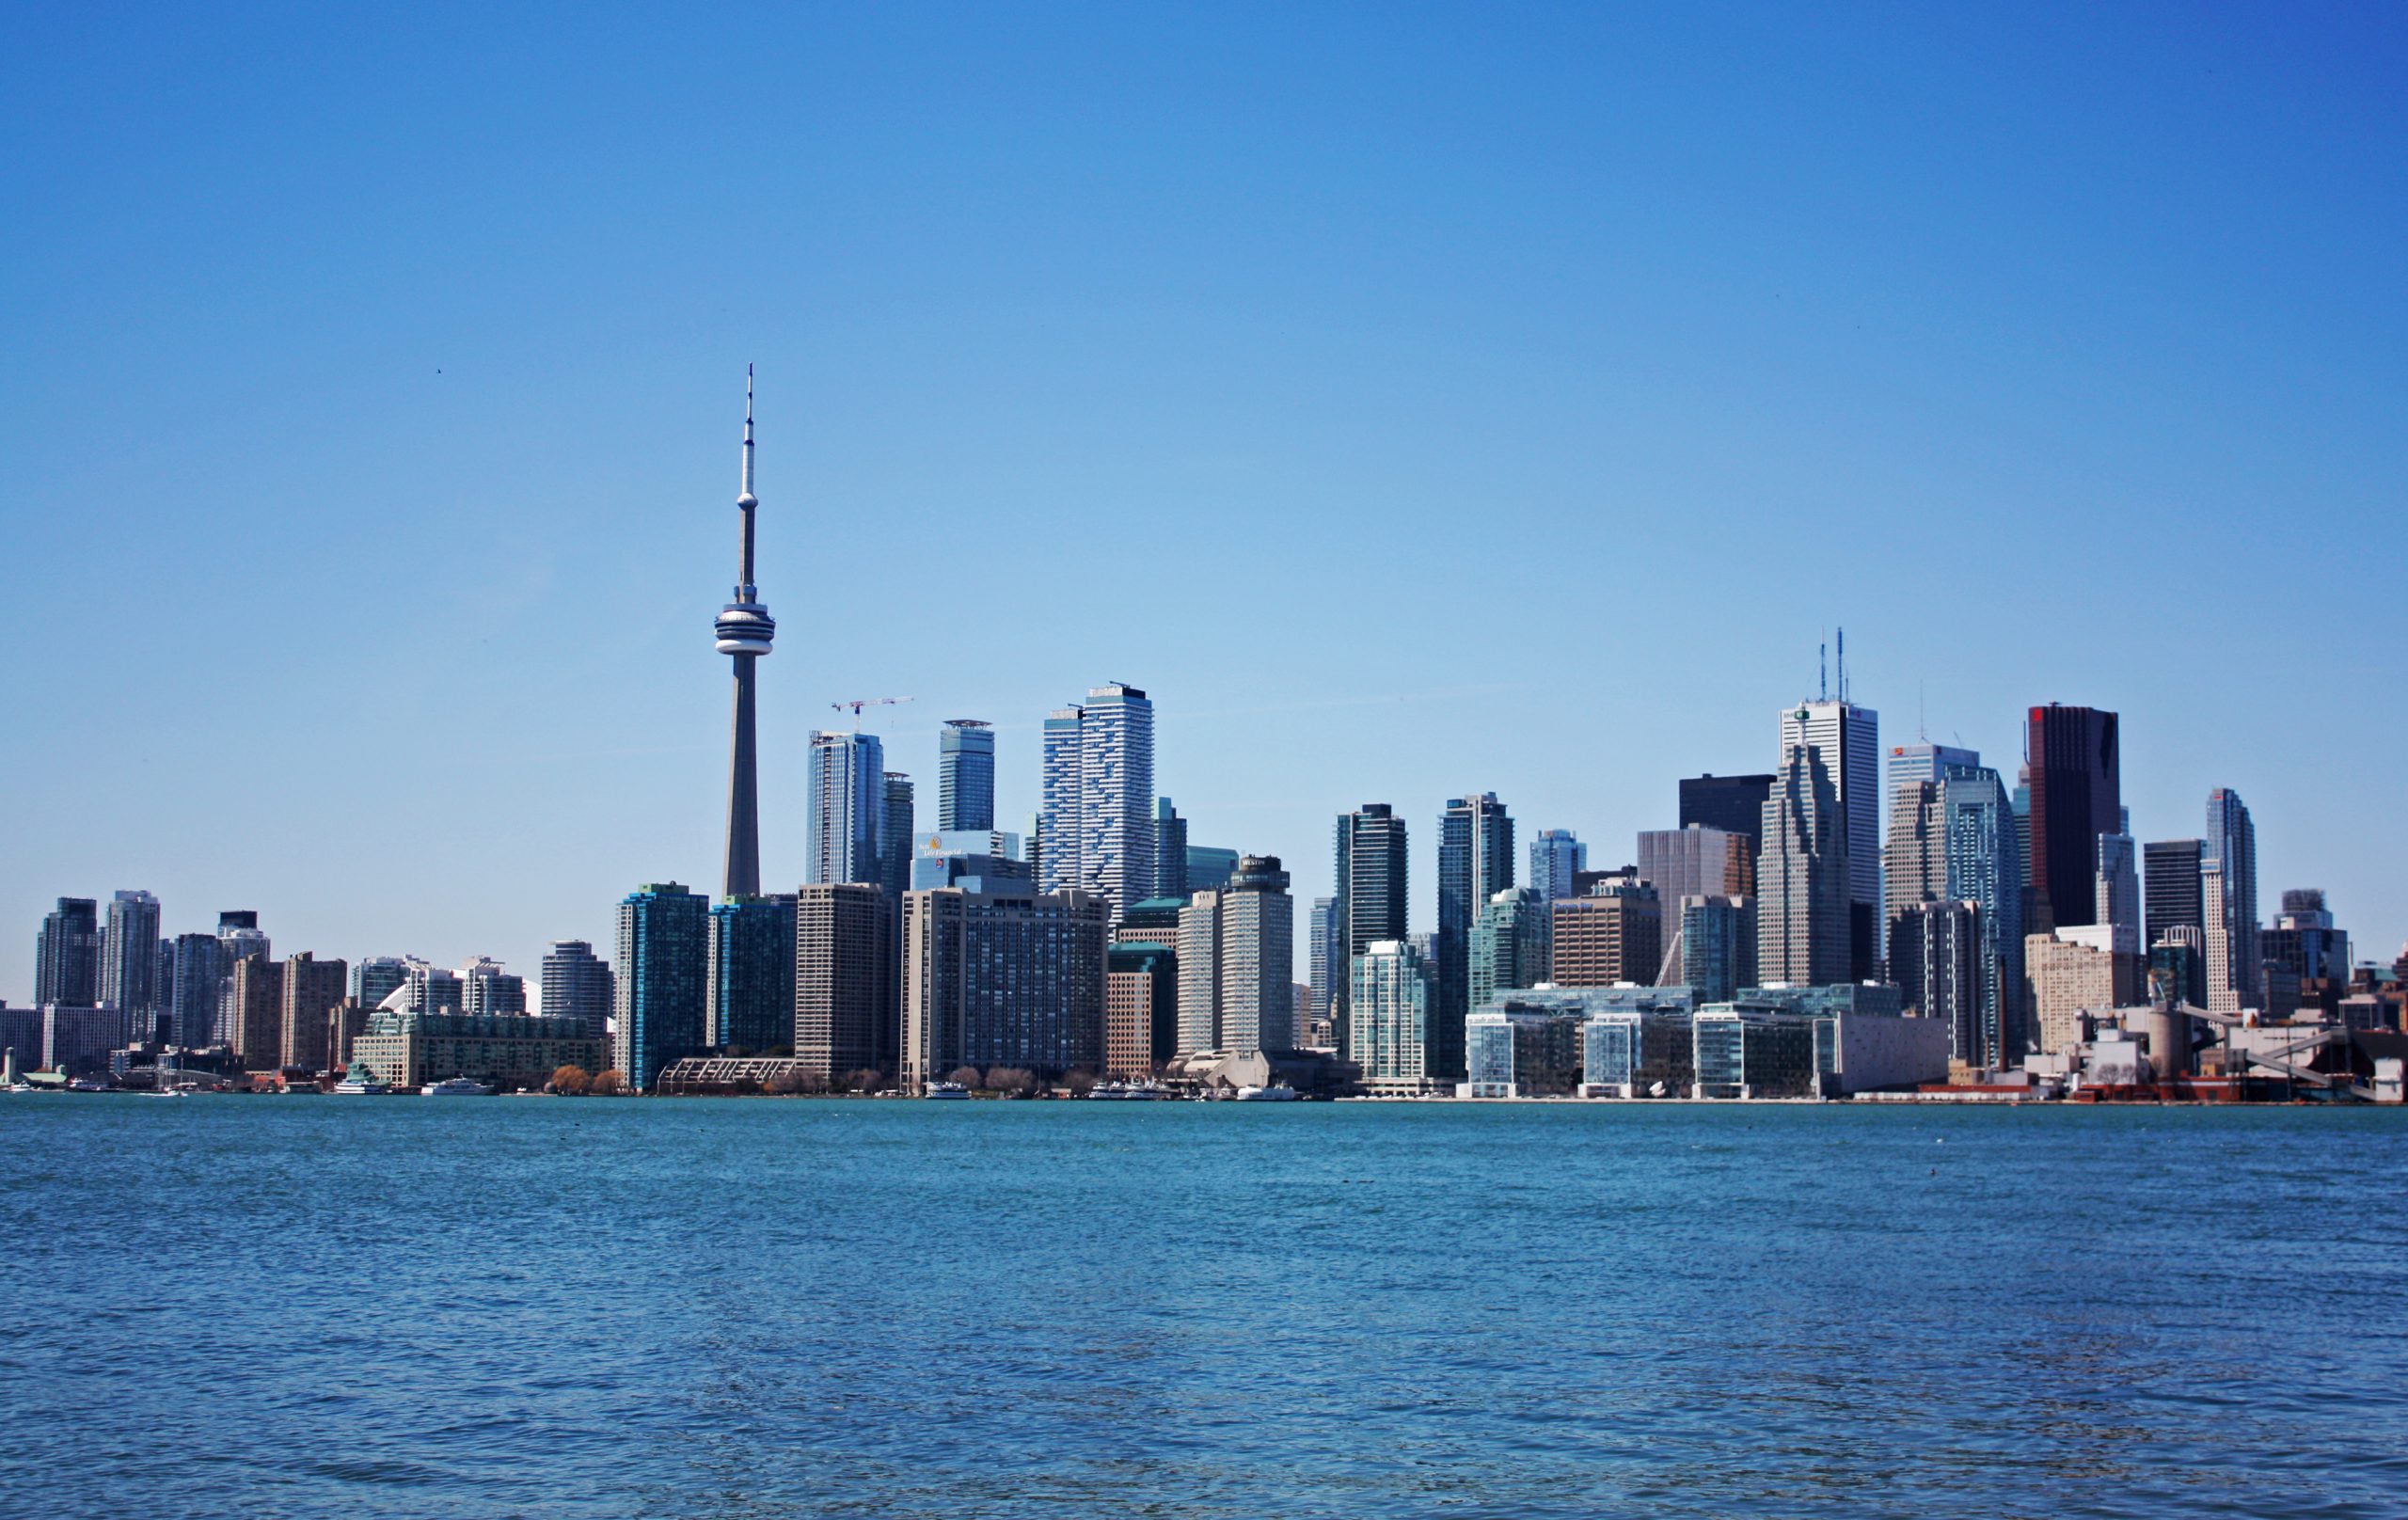 View of downtown Toronto from the water. The CN Tower is surrounded by tall buildings with Lake Ontario in the foreground.